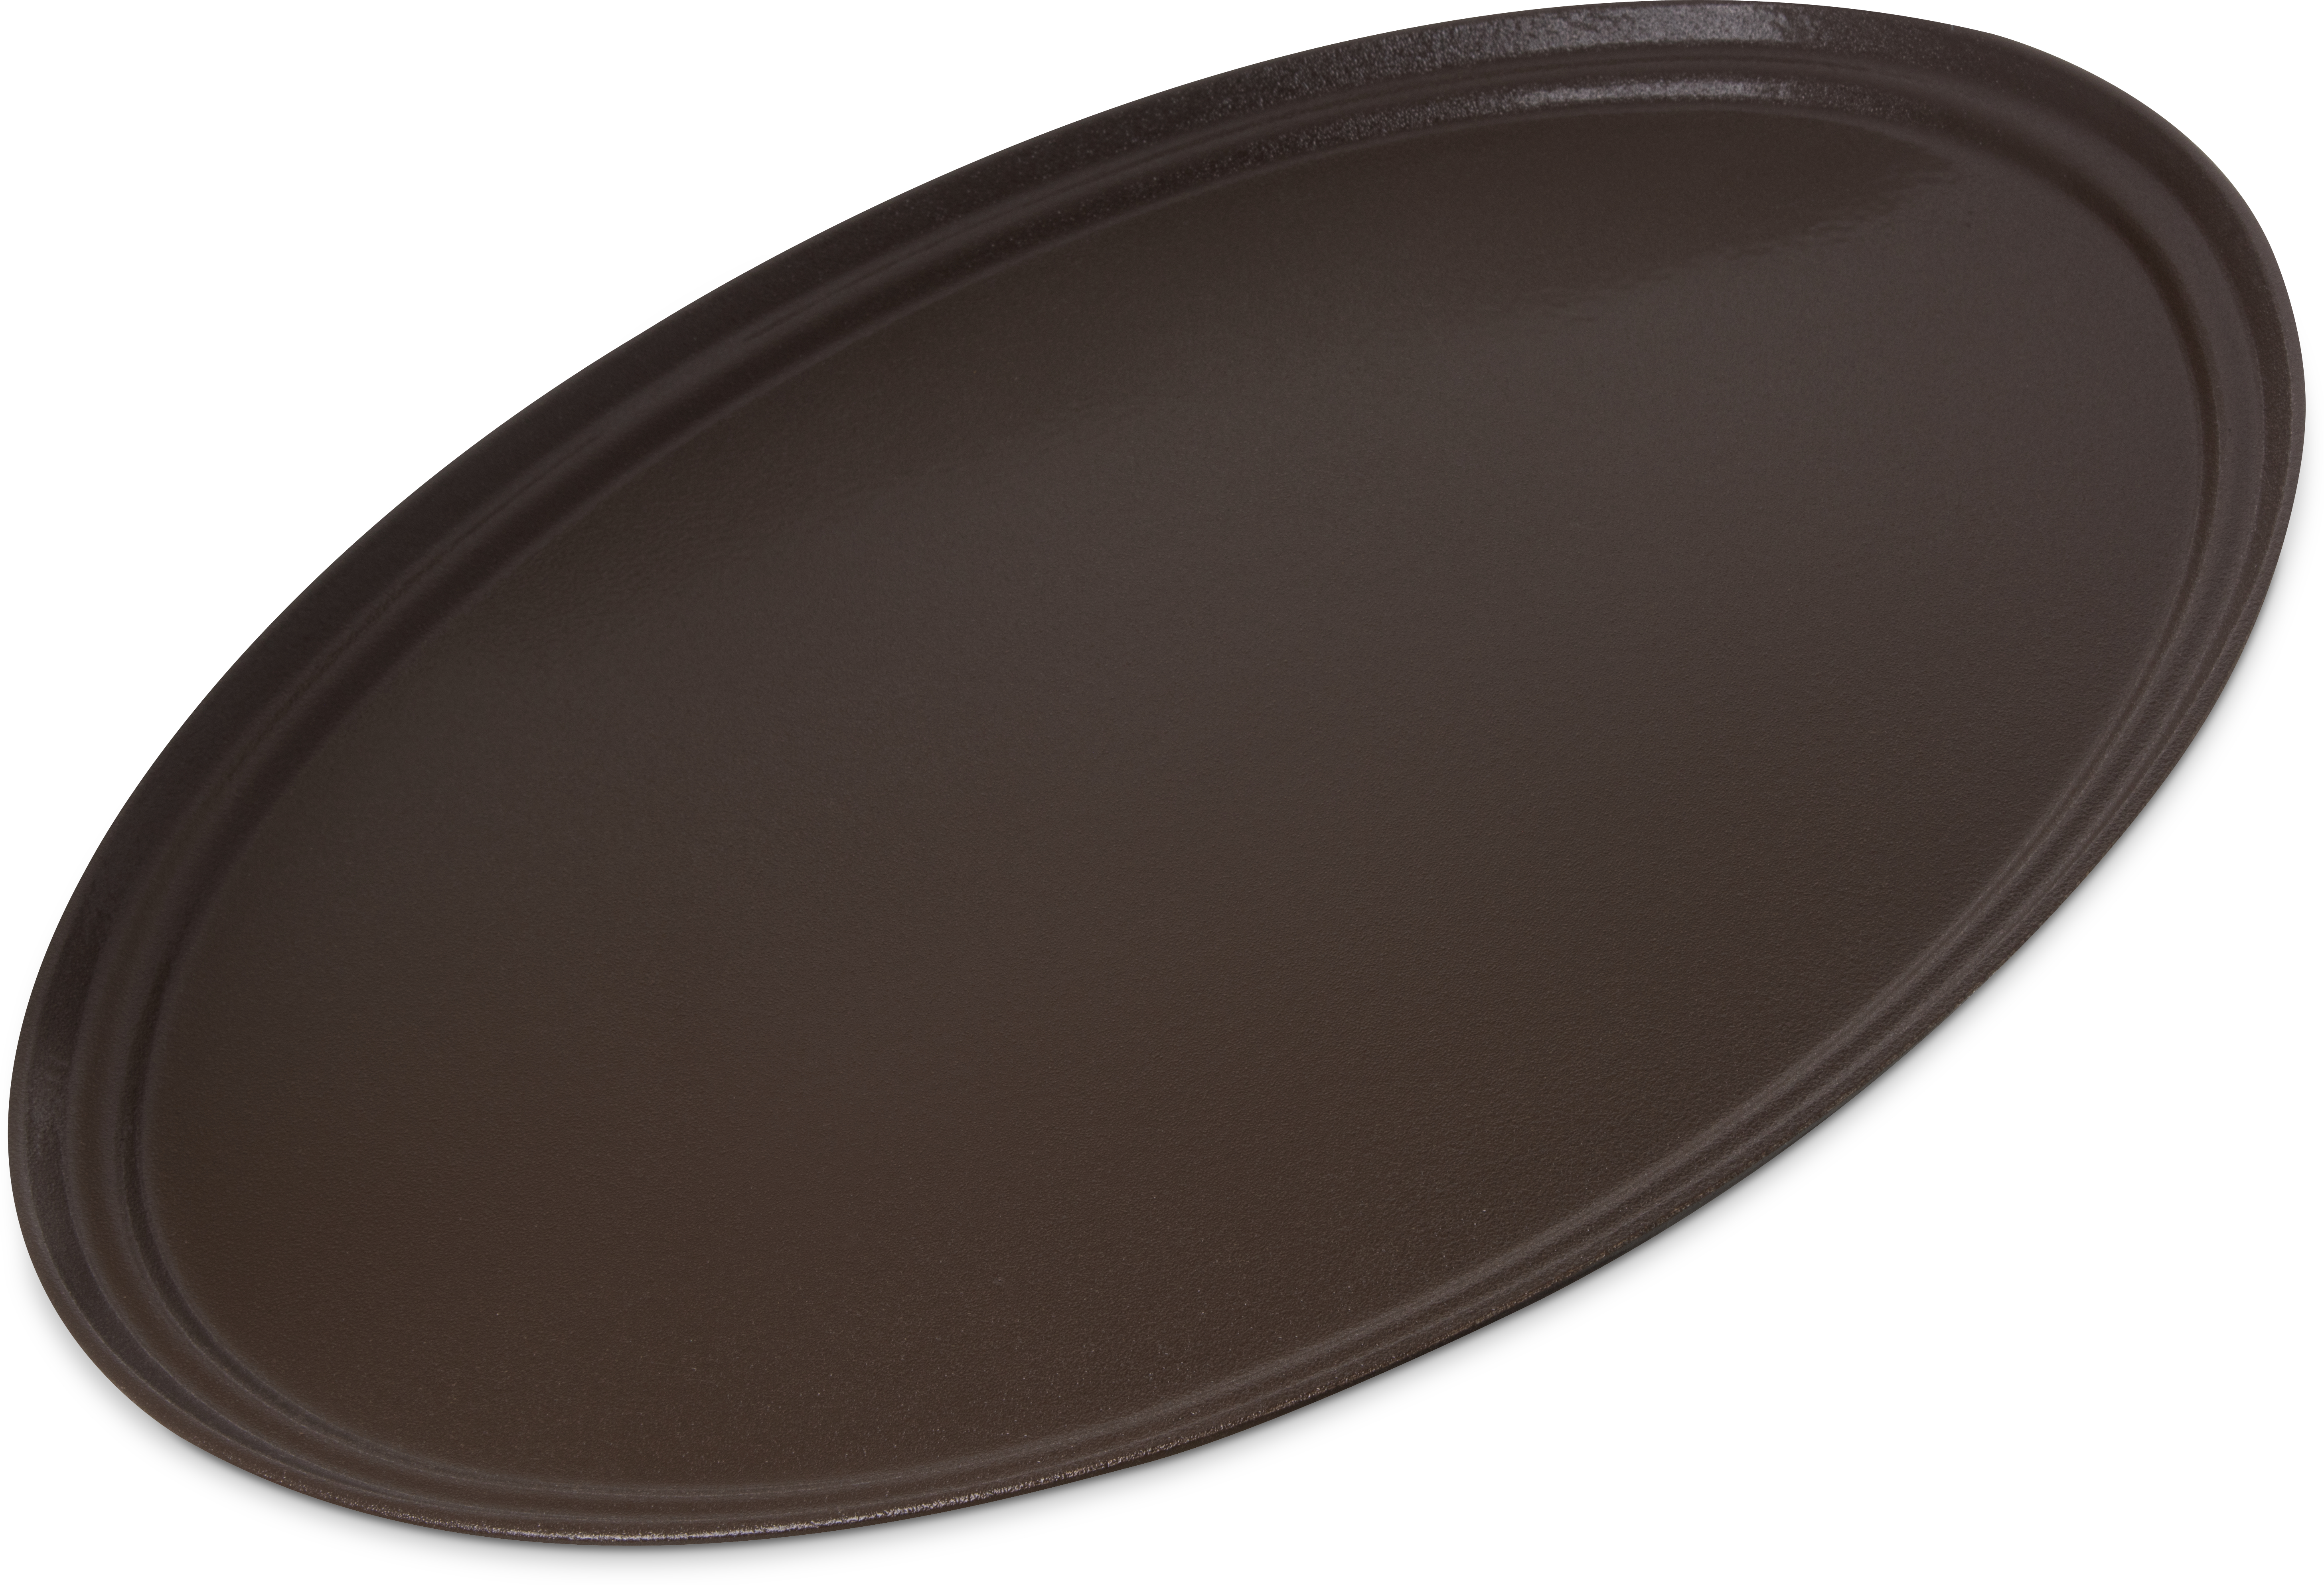 Griptite 2 Oval Tray 31 x 24 - Brown